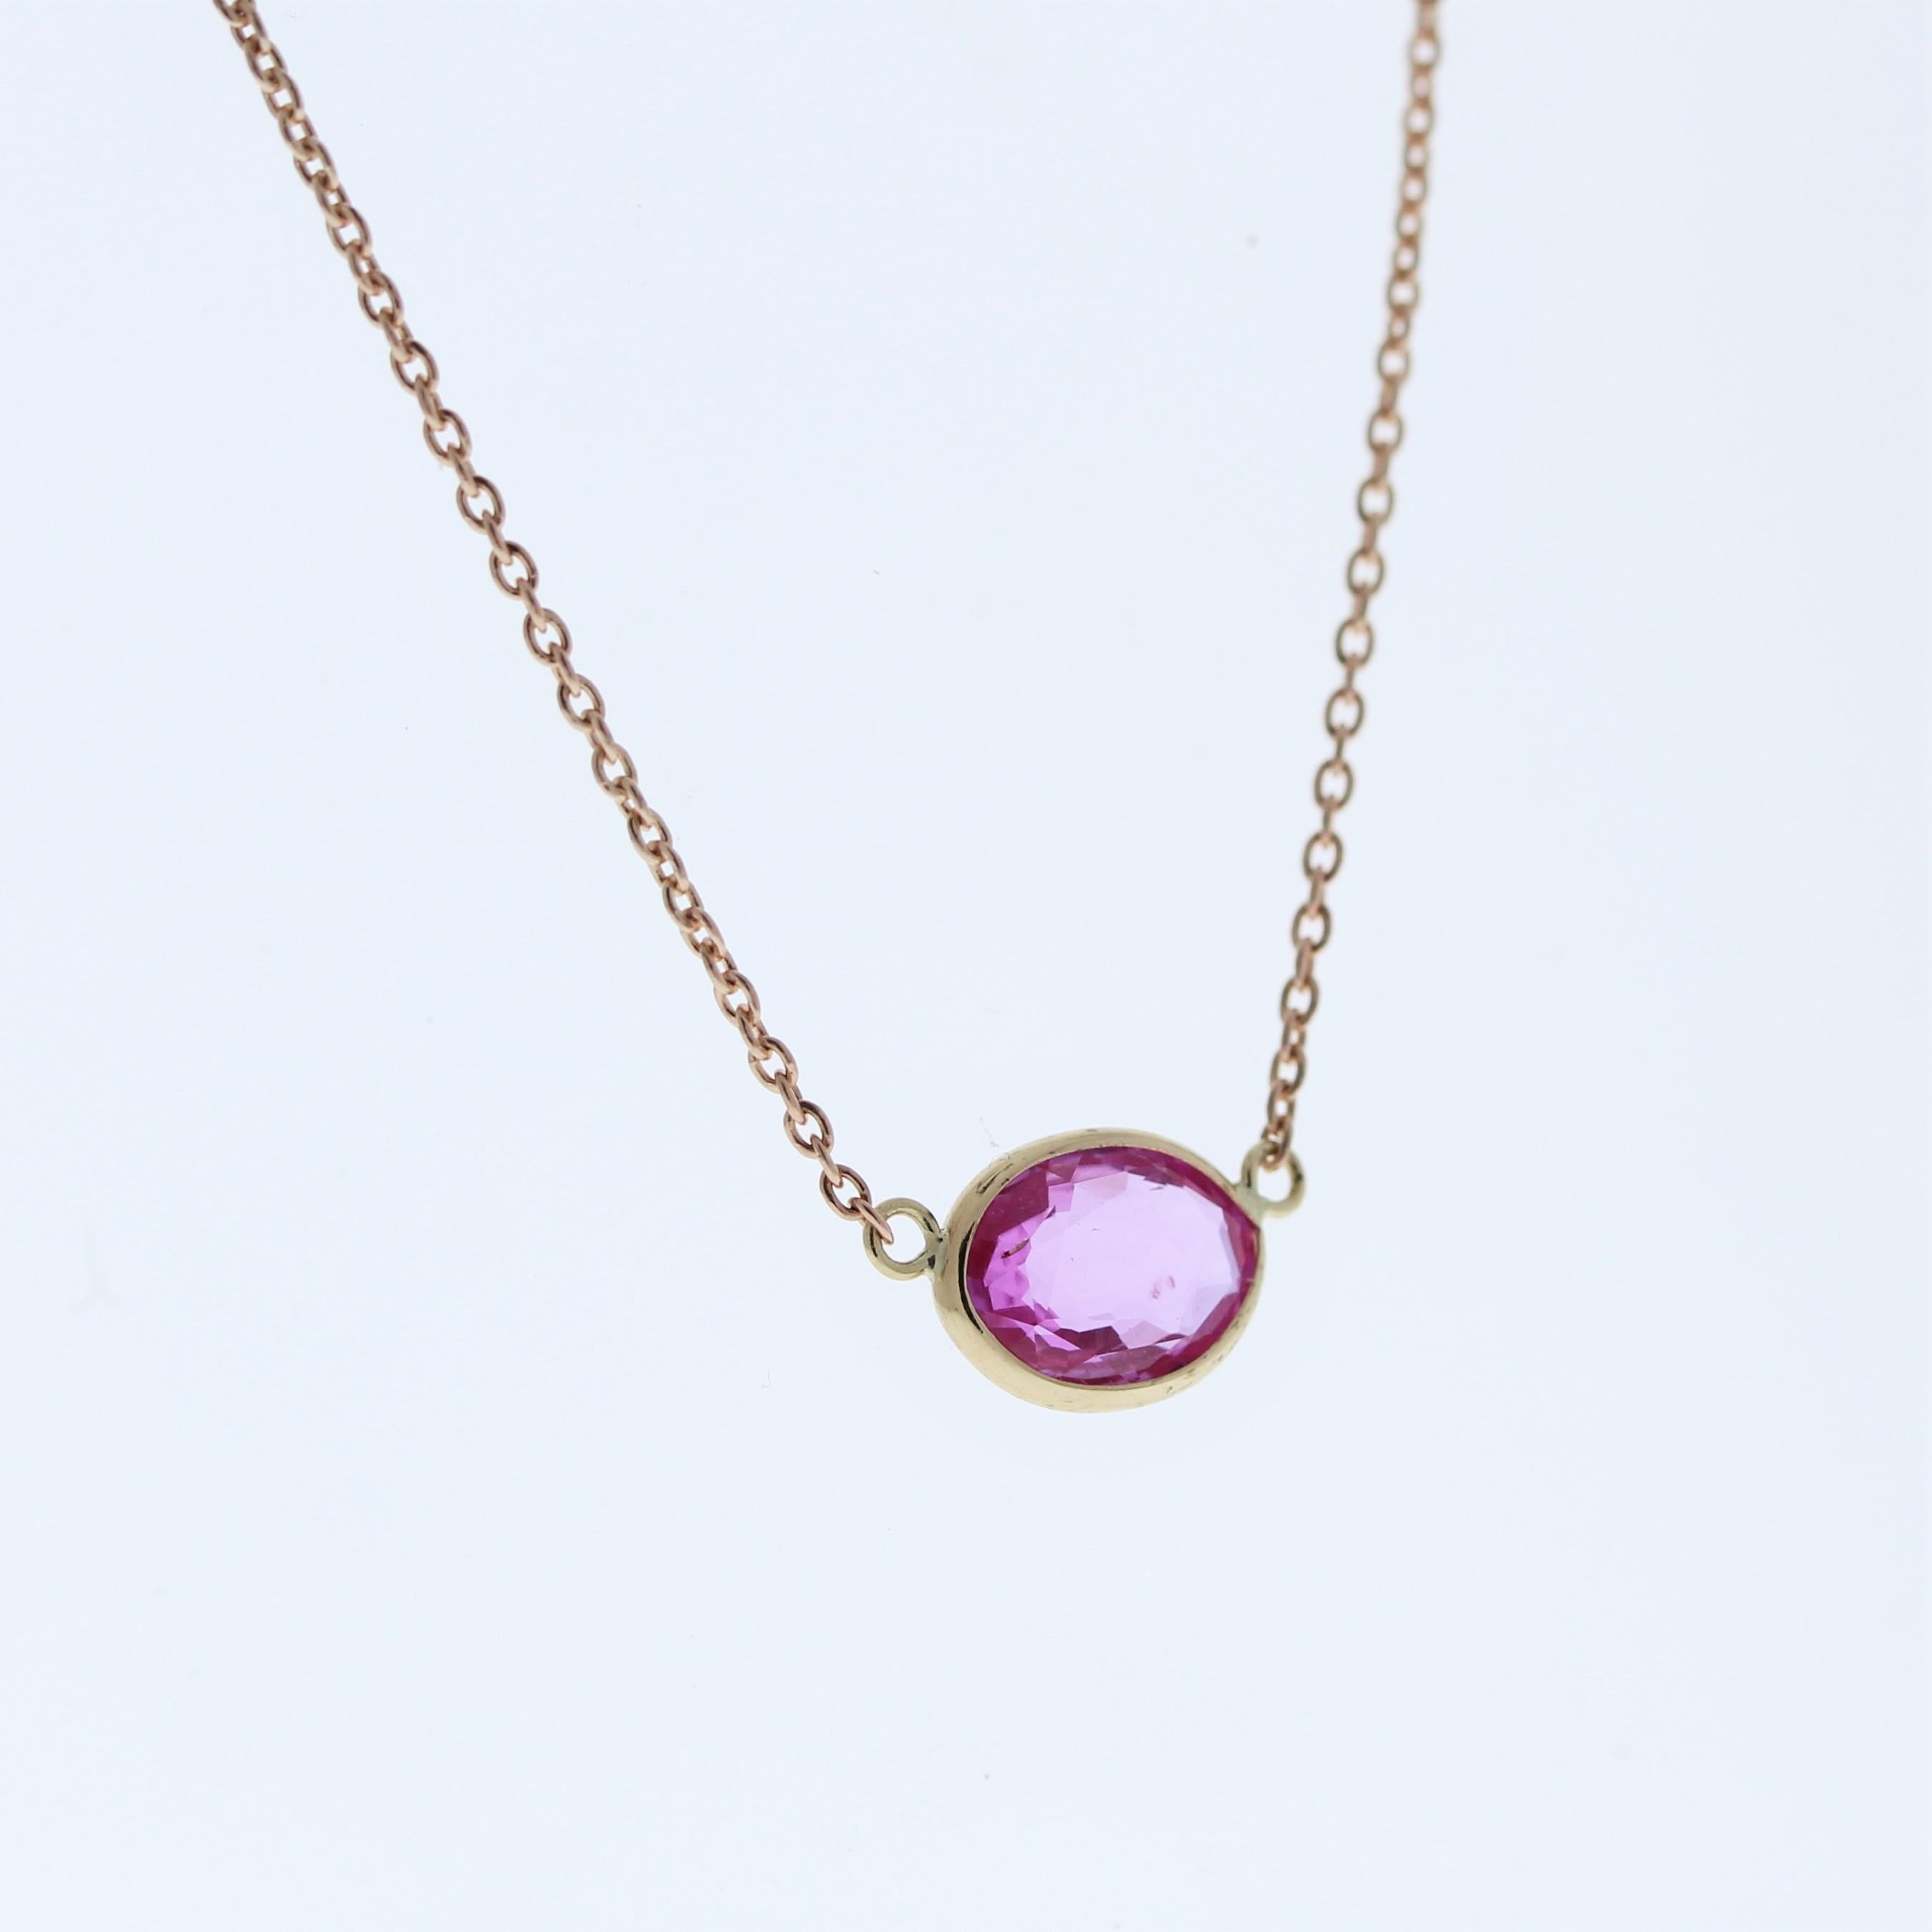 The necklace features a 1.54-carat oval-cut pink sapphire set in a 14 karat rose gold pendant or setting. The oval cut and the pink sapphire's color against the rose gold setting are likely to create a romantic and elegant fashion piece, suitable